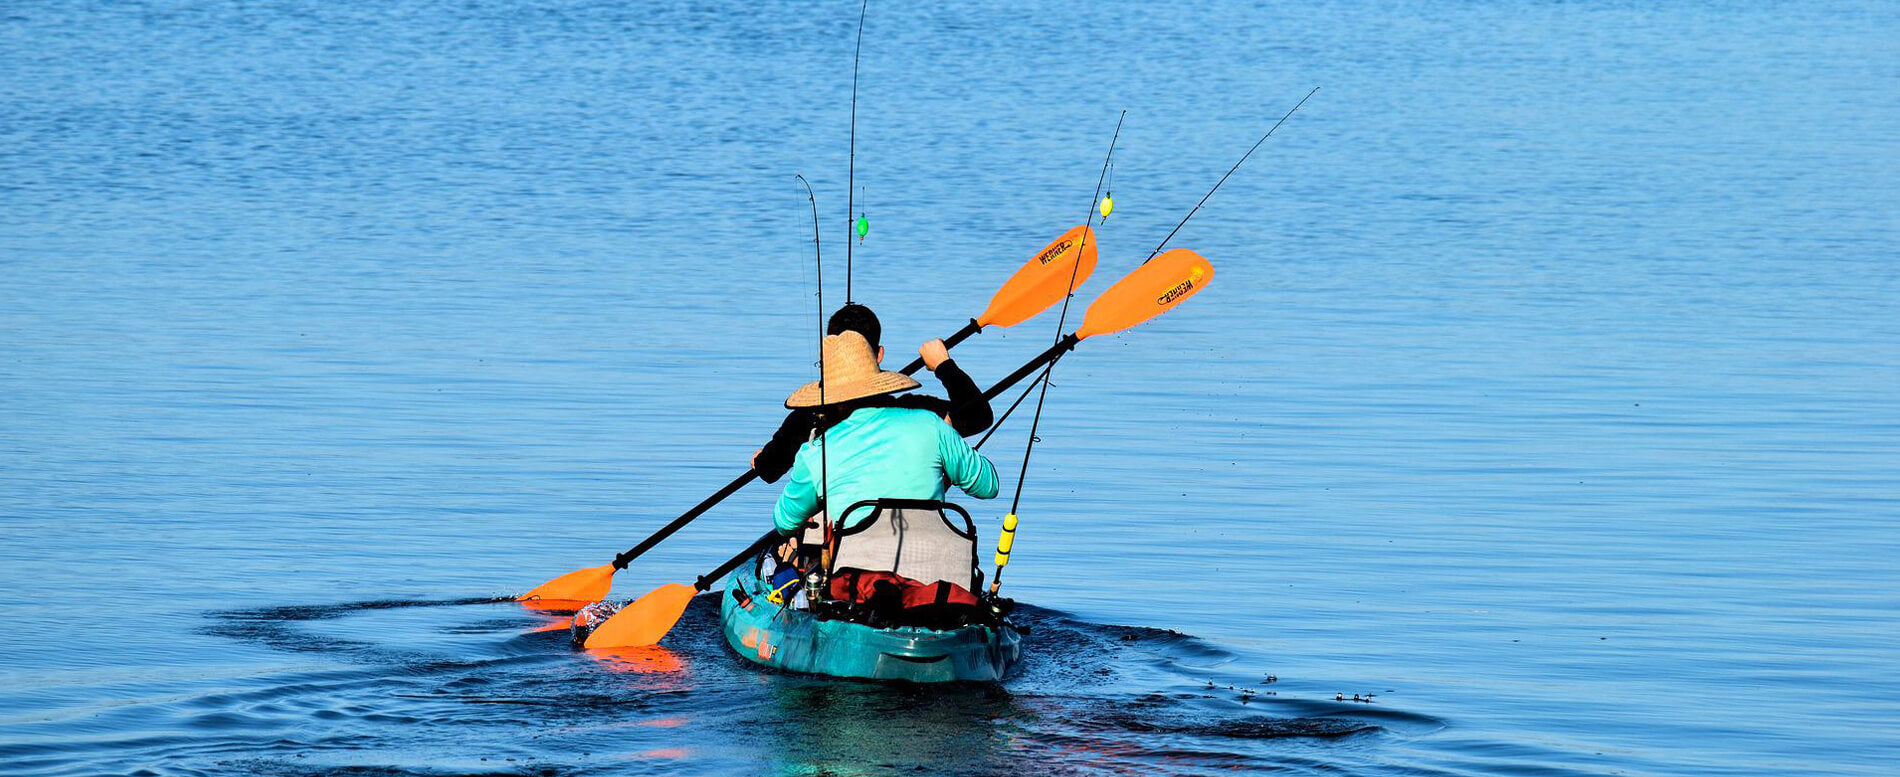 Exciting fishing kayak 2 seater For Thrill And Adventure 